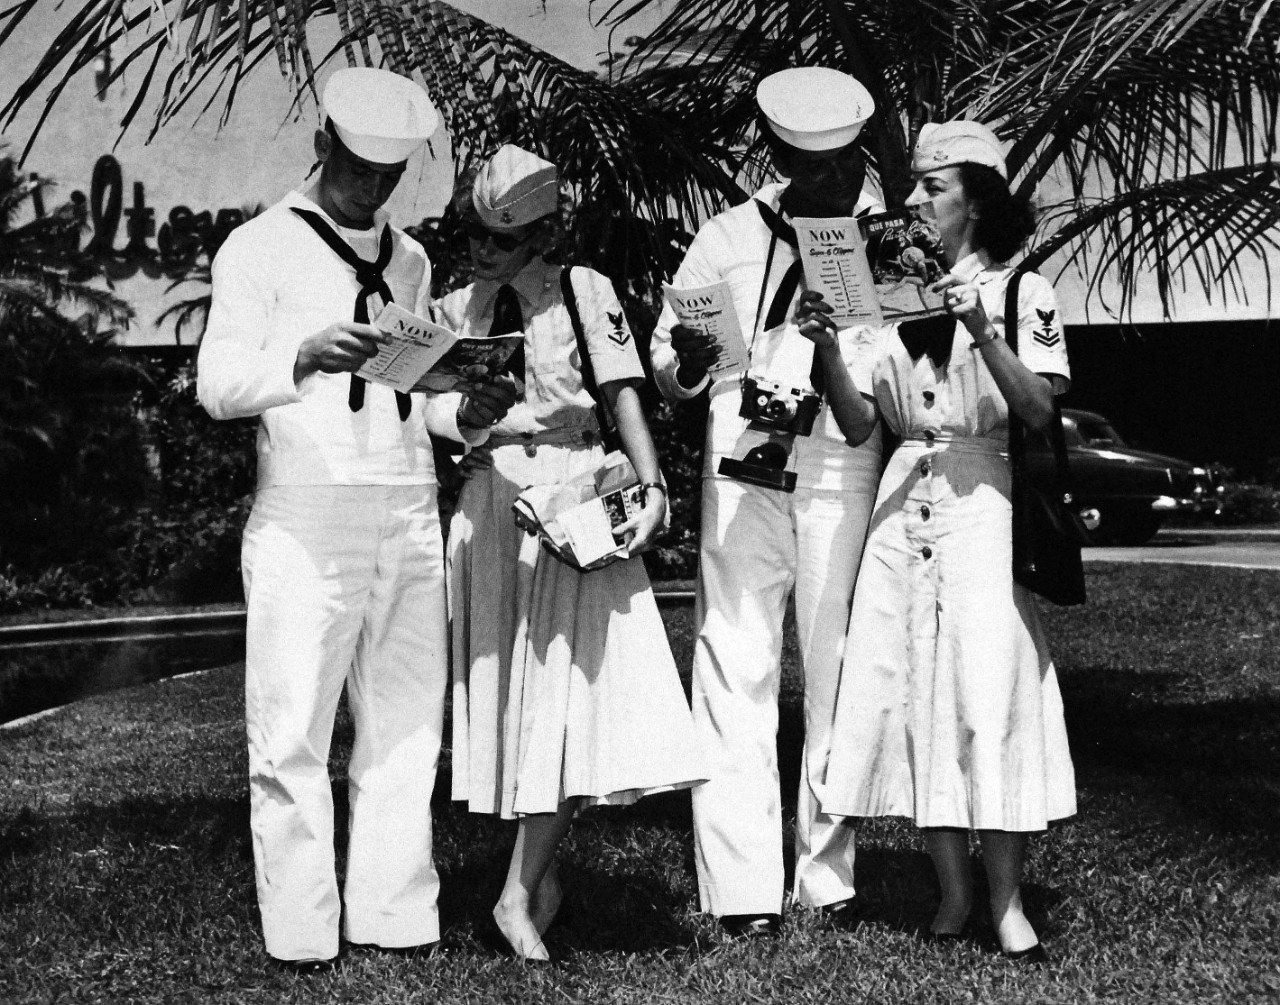 USN 709021:    WAVES and friends on liberty, October 1953.   Posed on the spacious gardens of the Caribe Hilton Hotel while reading the booklet “Que Pasa” (What’s Happening in Puerto Rico), the two couples pause to decide on other points of interest they would be able to see during the afternoon.  Left to right:  Baker, Myers, LaFreniere, and Paluzzi.   Master Caption:   Navy Accepts Women Volunteers for Duty on the High Seas.   For the first time in history, the U.S. Navy has accepted volunteers for duty on the high seas from women in the enlisted WAVES.  Those eligible were WAVES of the Hospital Corps to fill sixty-three billets on ships of the Military Sea Transportation Service.  Photograph released October 26, 1953.   Official U.S. Navy photograph, now in the collections of the National Archives.   